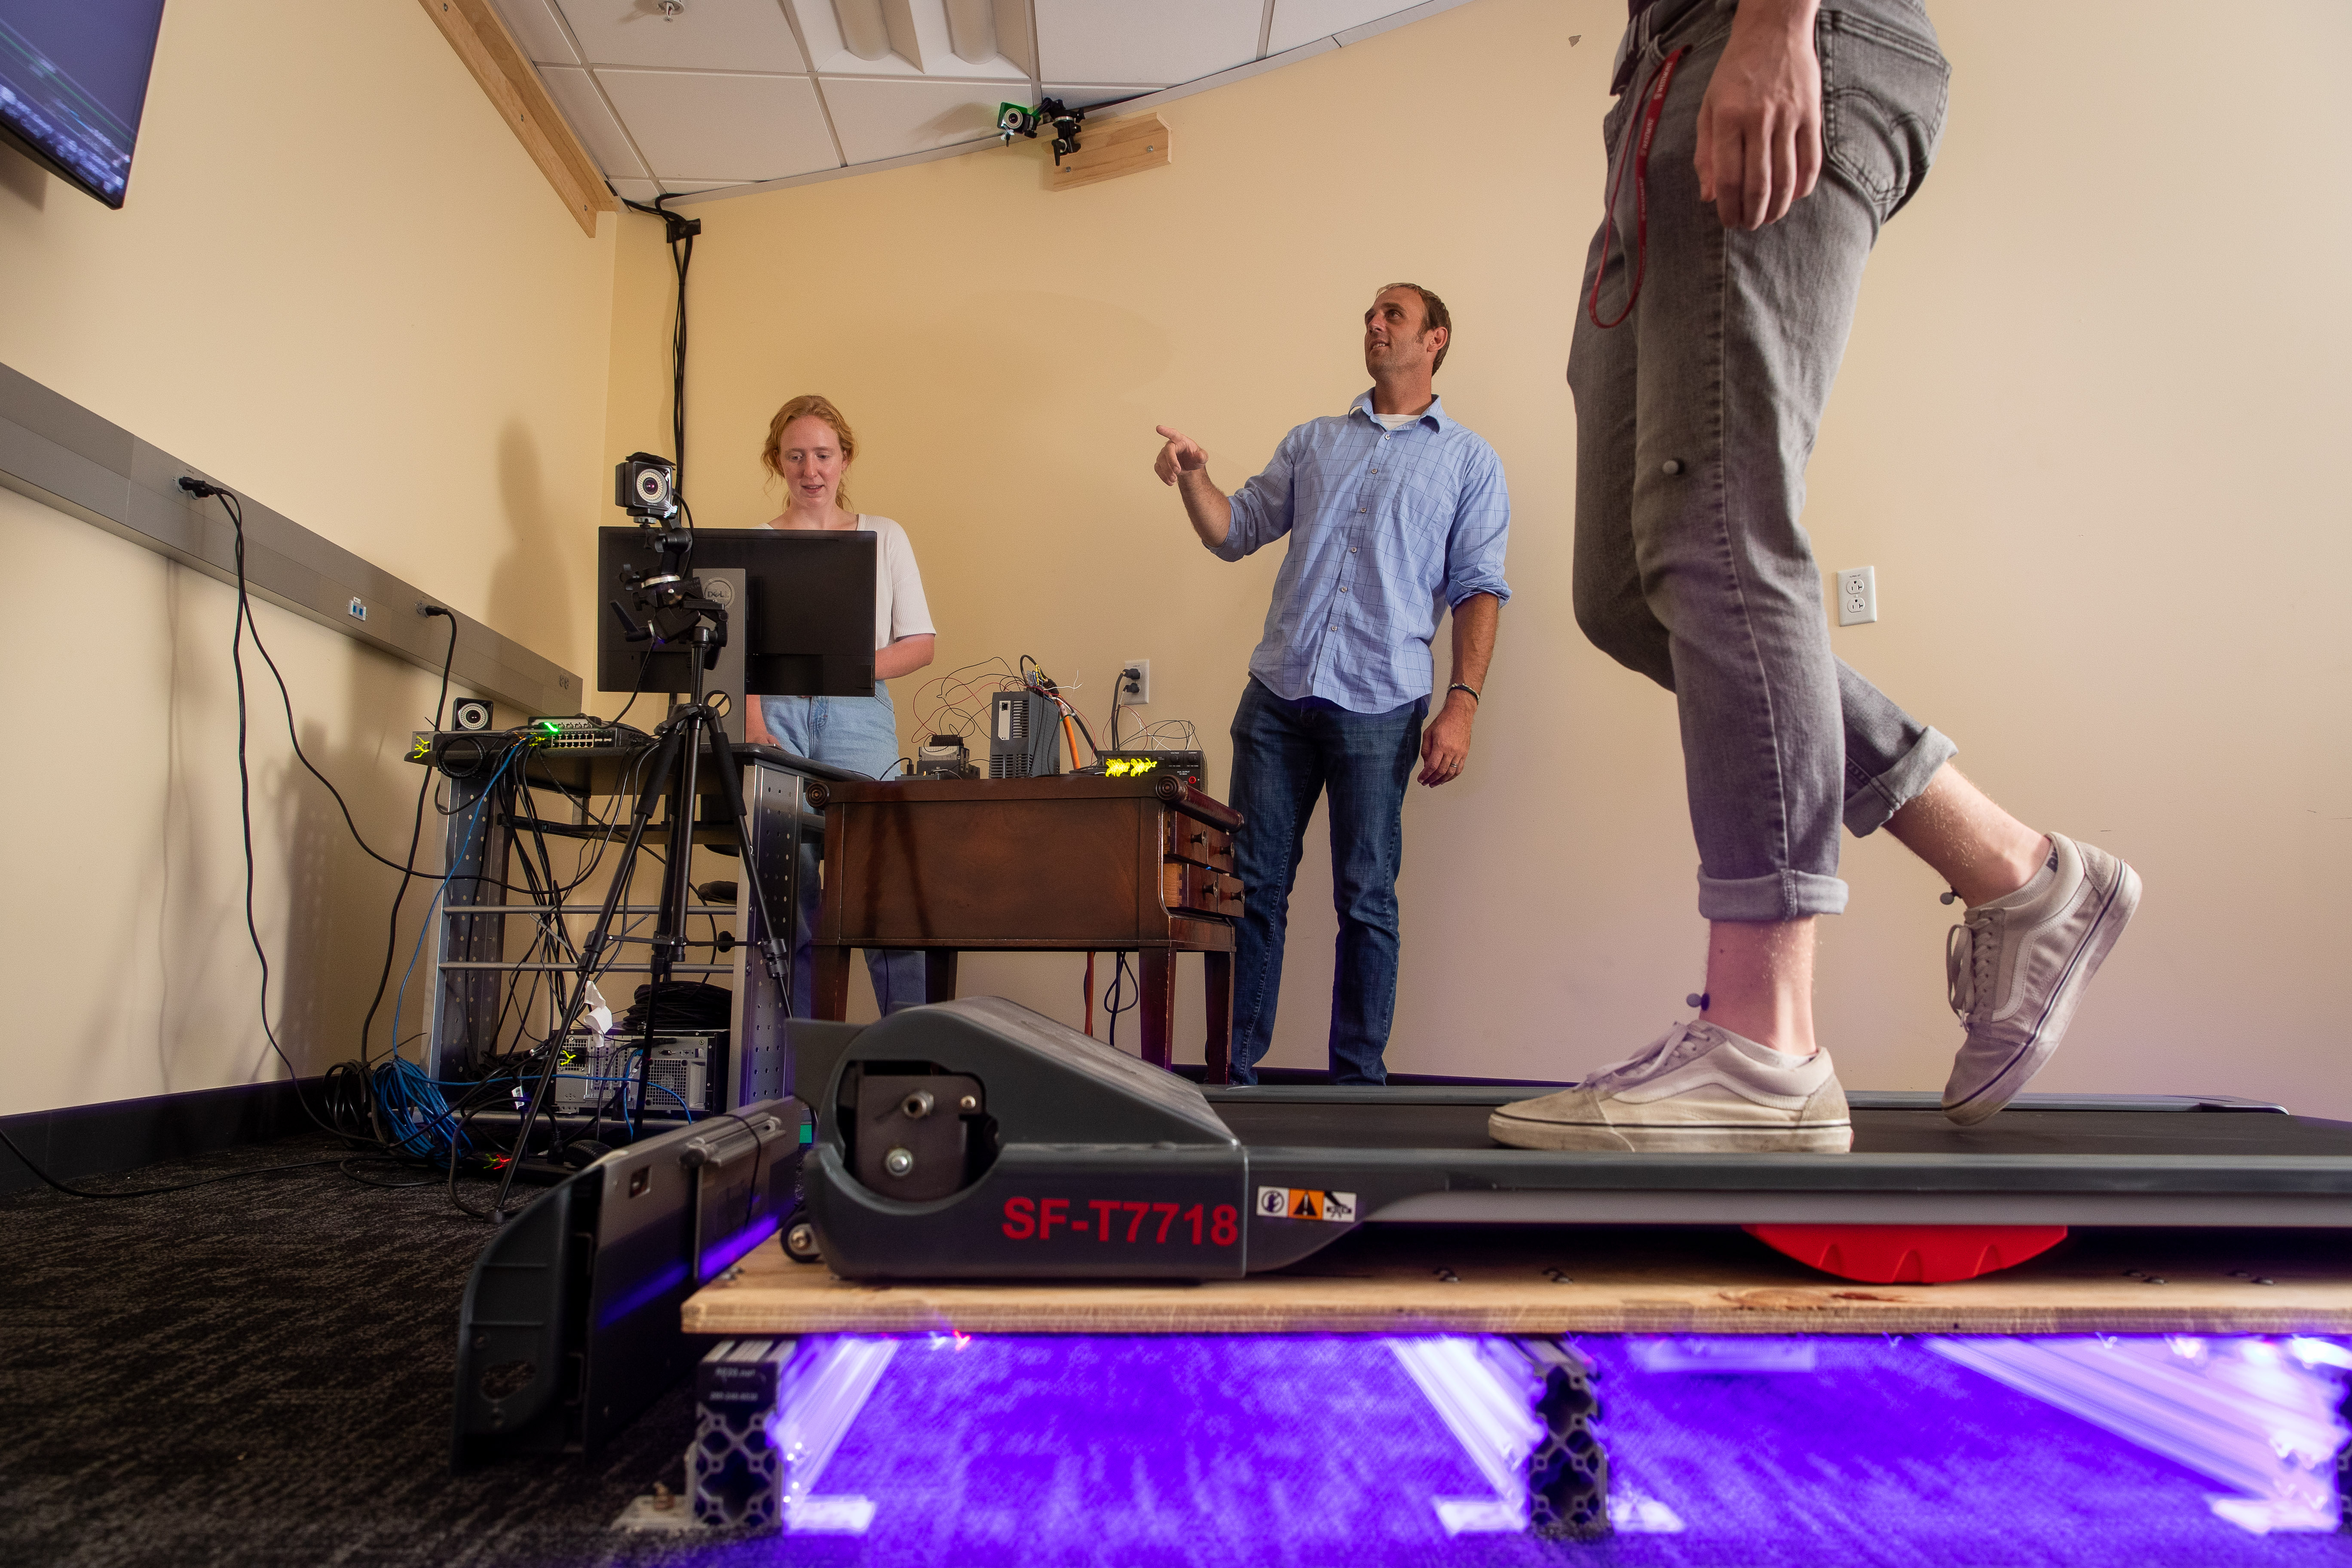 Adam Goodworth and student researchers on a treadmill